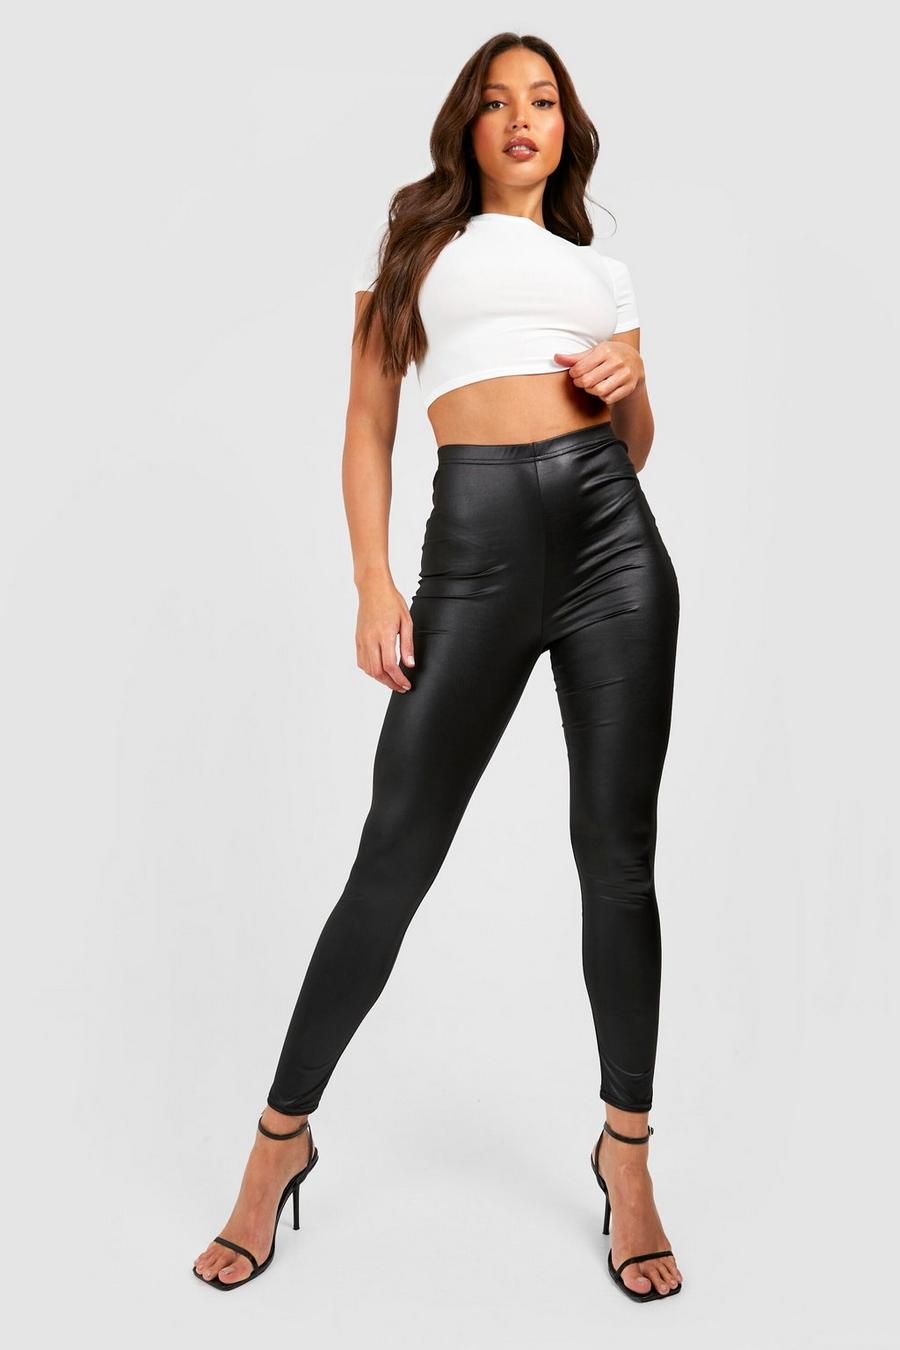 Black Tall Leather Look High Waisted Leggings image number 1